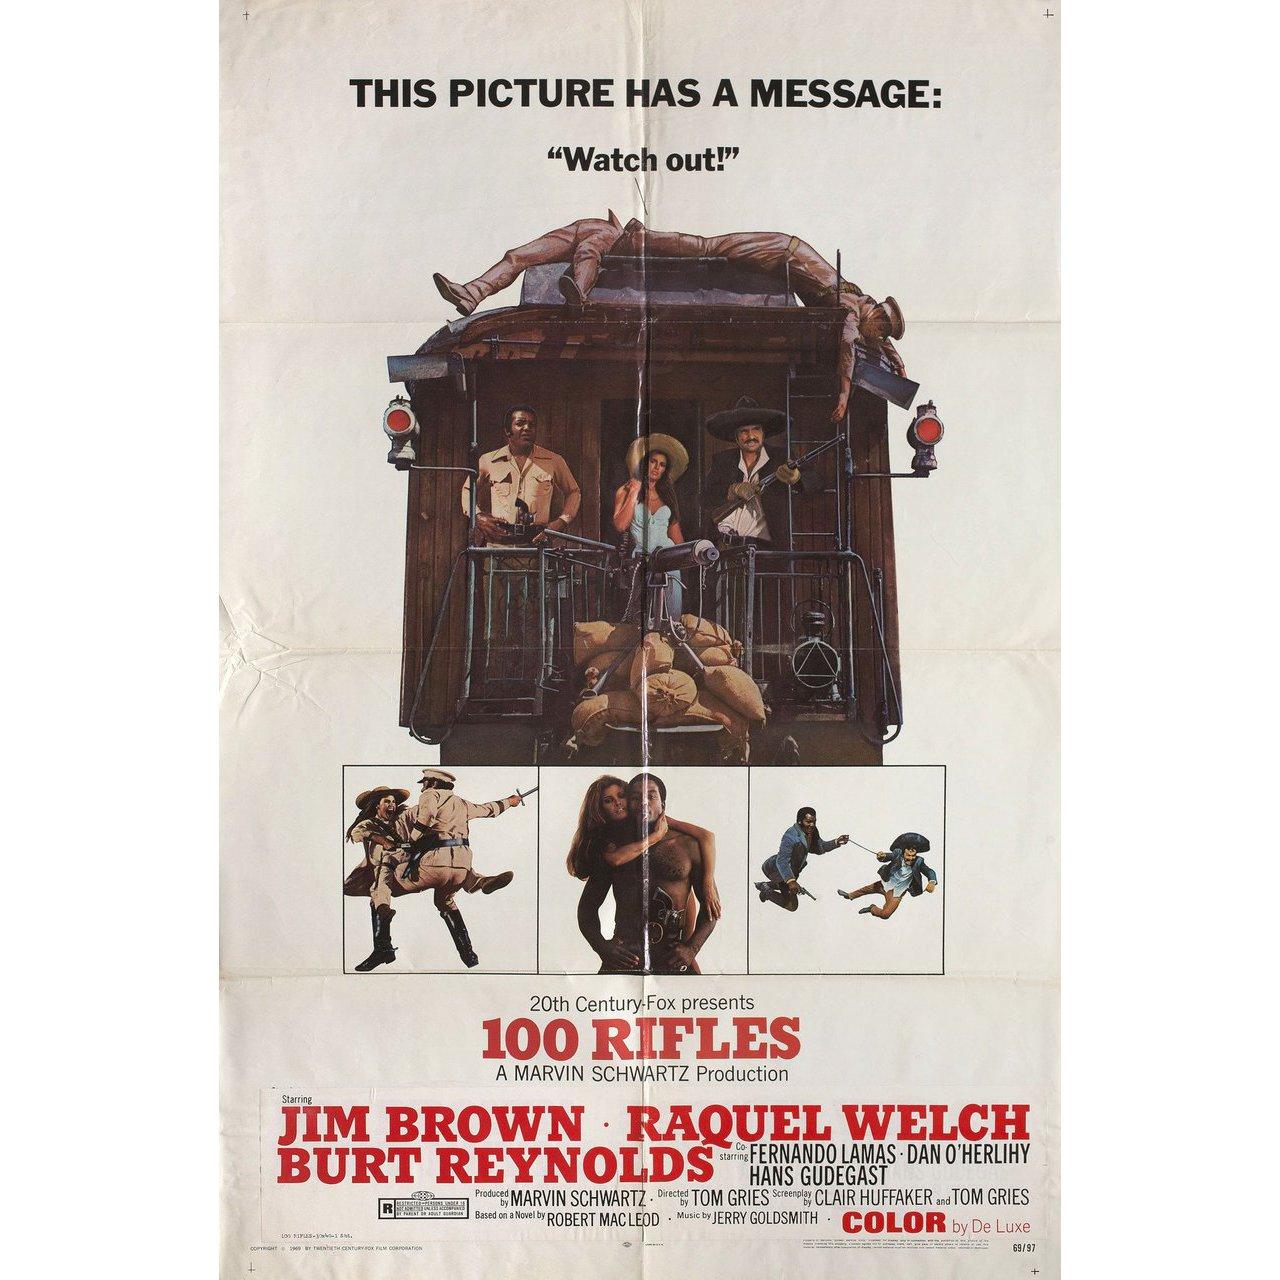 Original 1969 U.S. one sheet poster for. Very Good condition, folded with snipe. Many original posters were issued folded or were subsequently folded. Please note: the size is stated in inches and the actual size can vary by an inch or more.
    